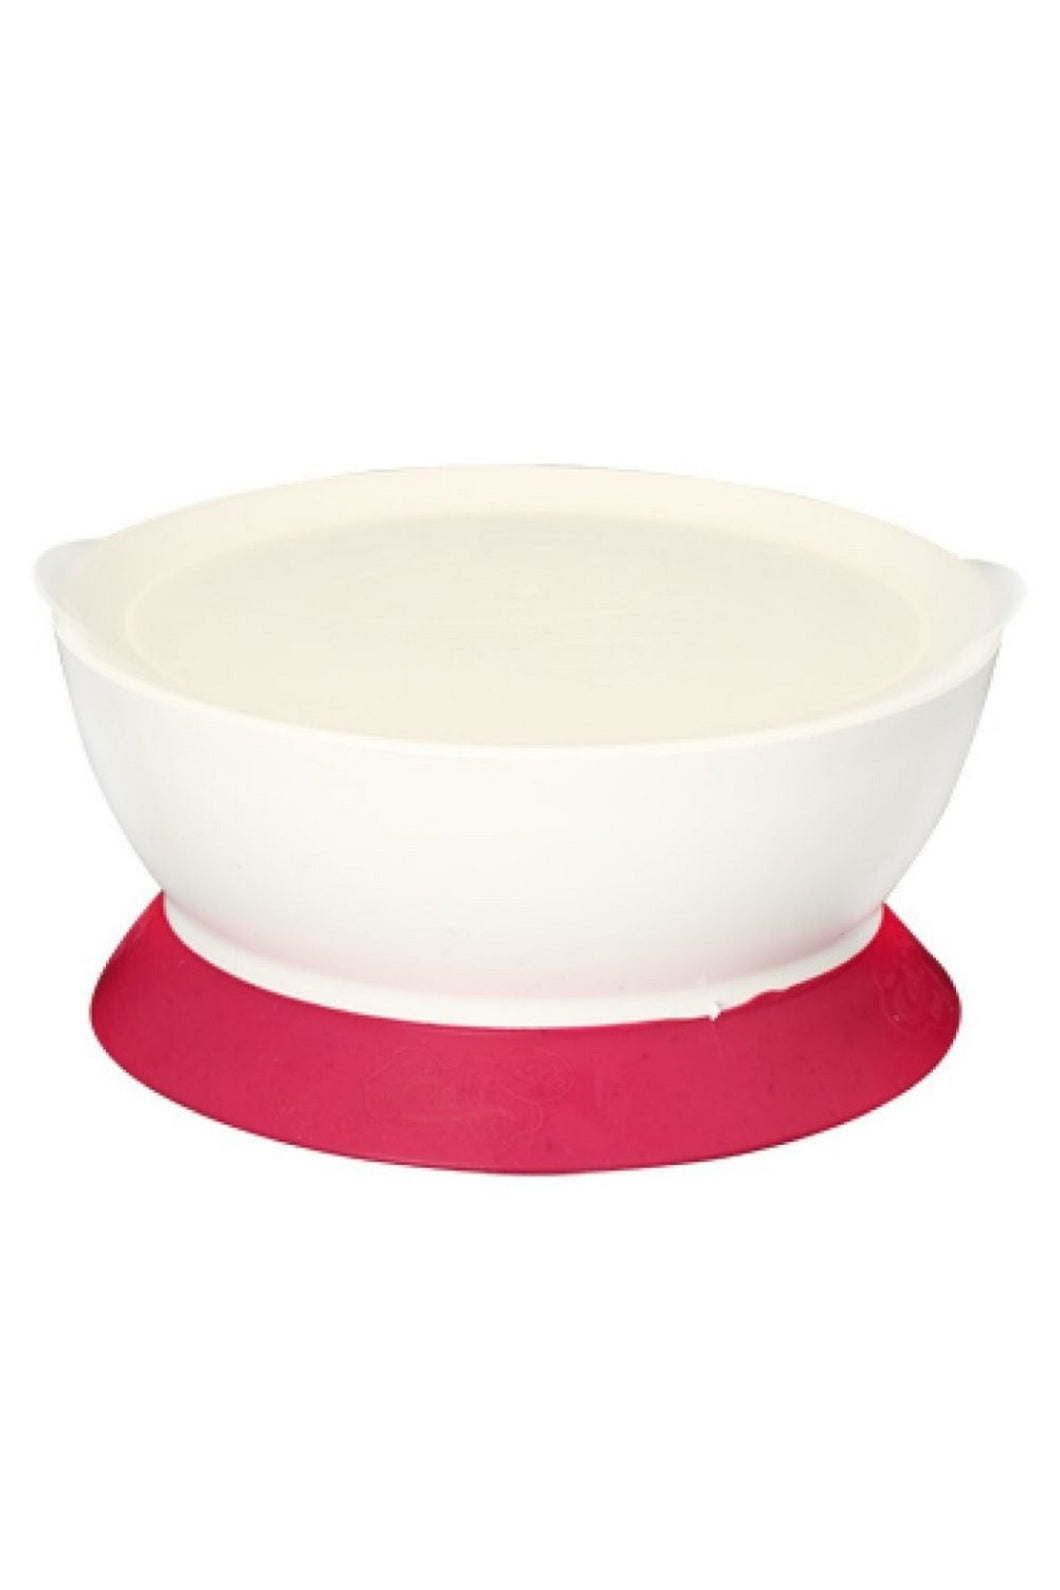 CaliBowl 12oz Suction Bowl with Lid 4